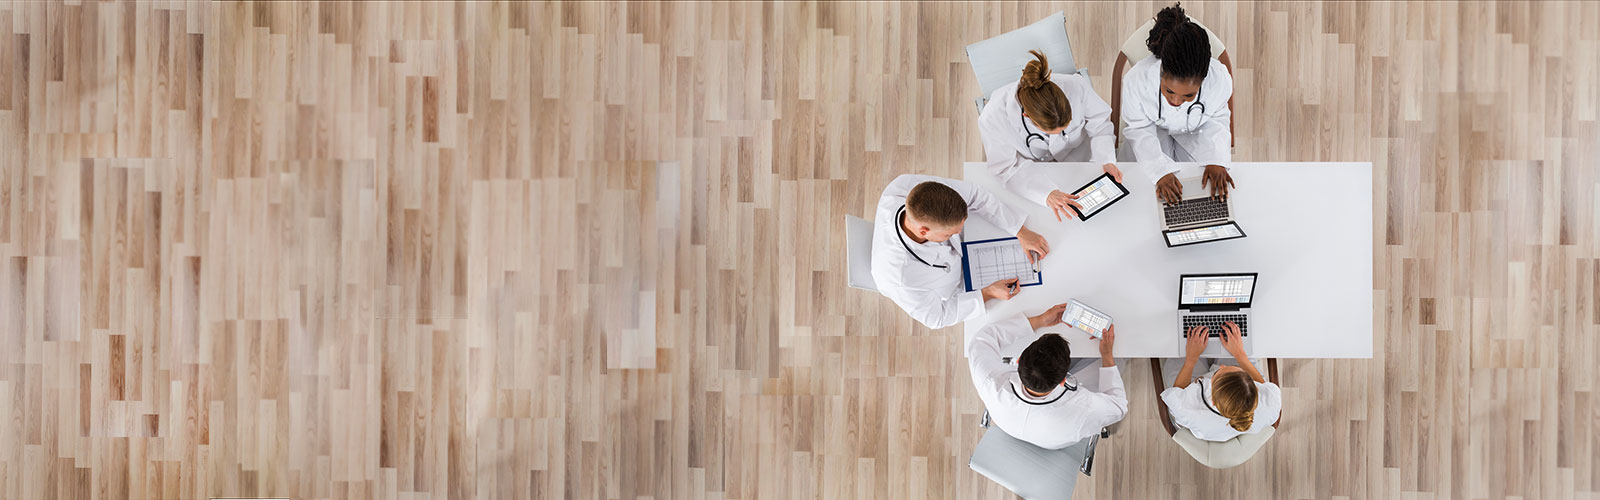 Banner image - A group of physicians sitting together at a table collaborating.